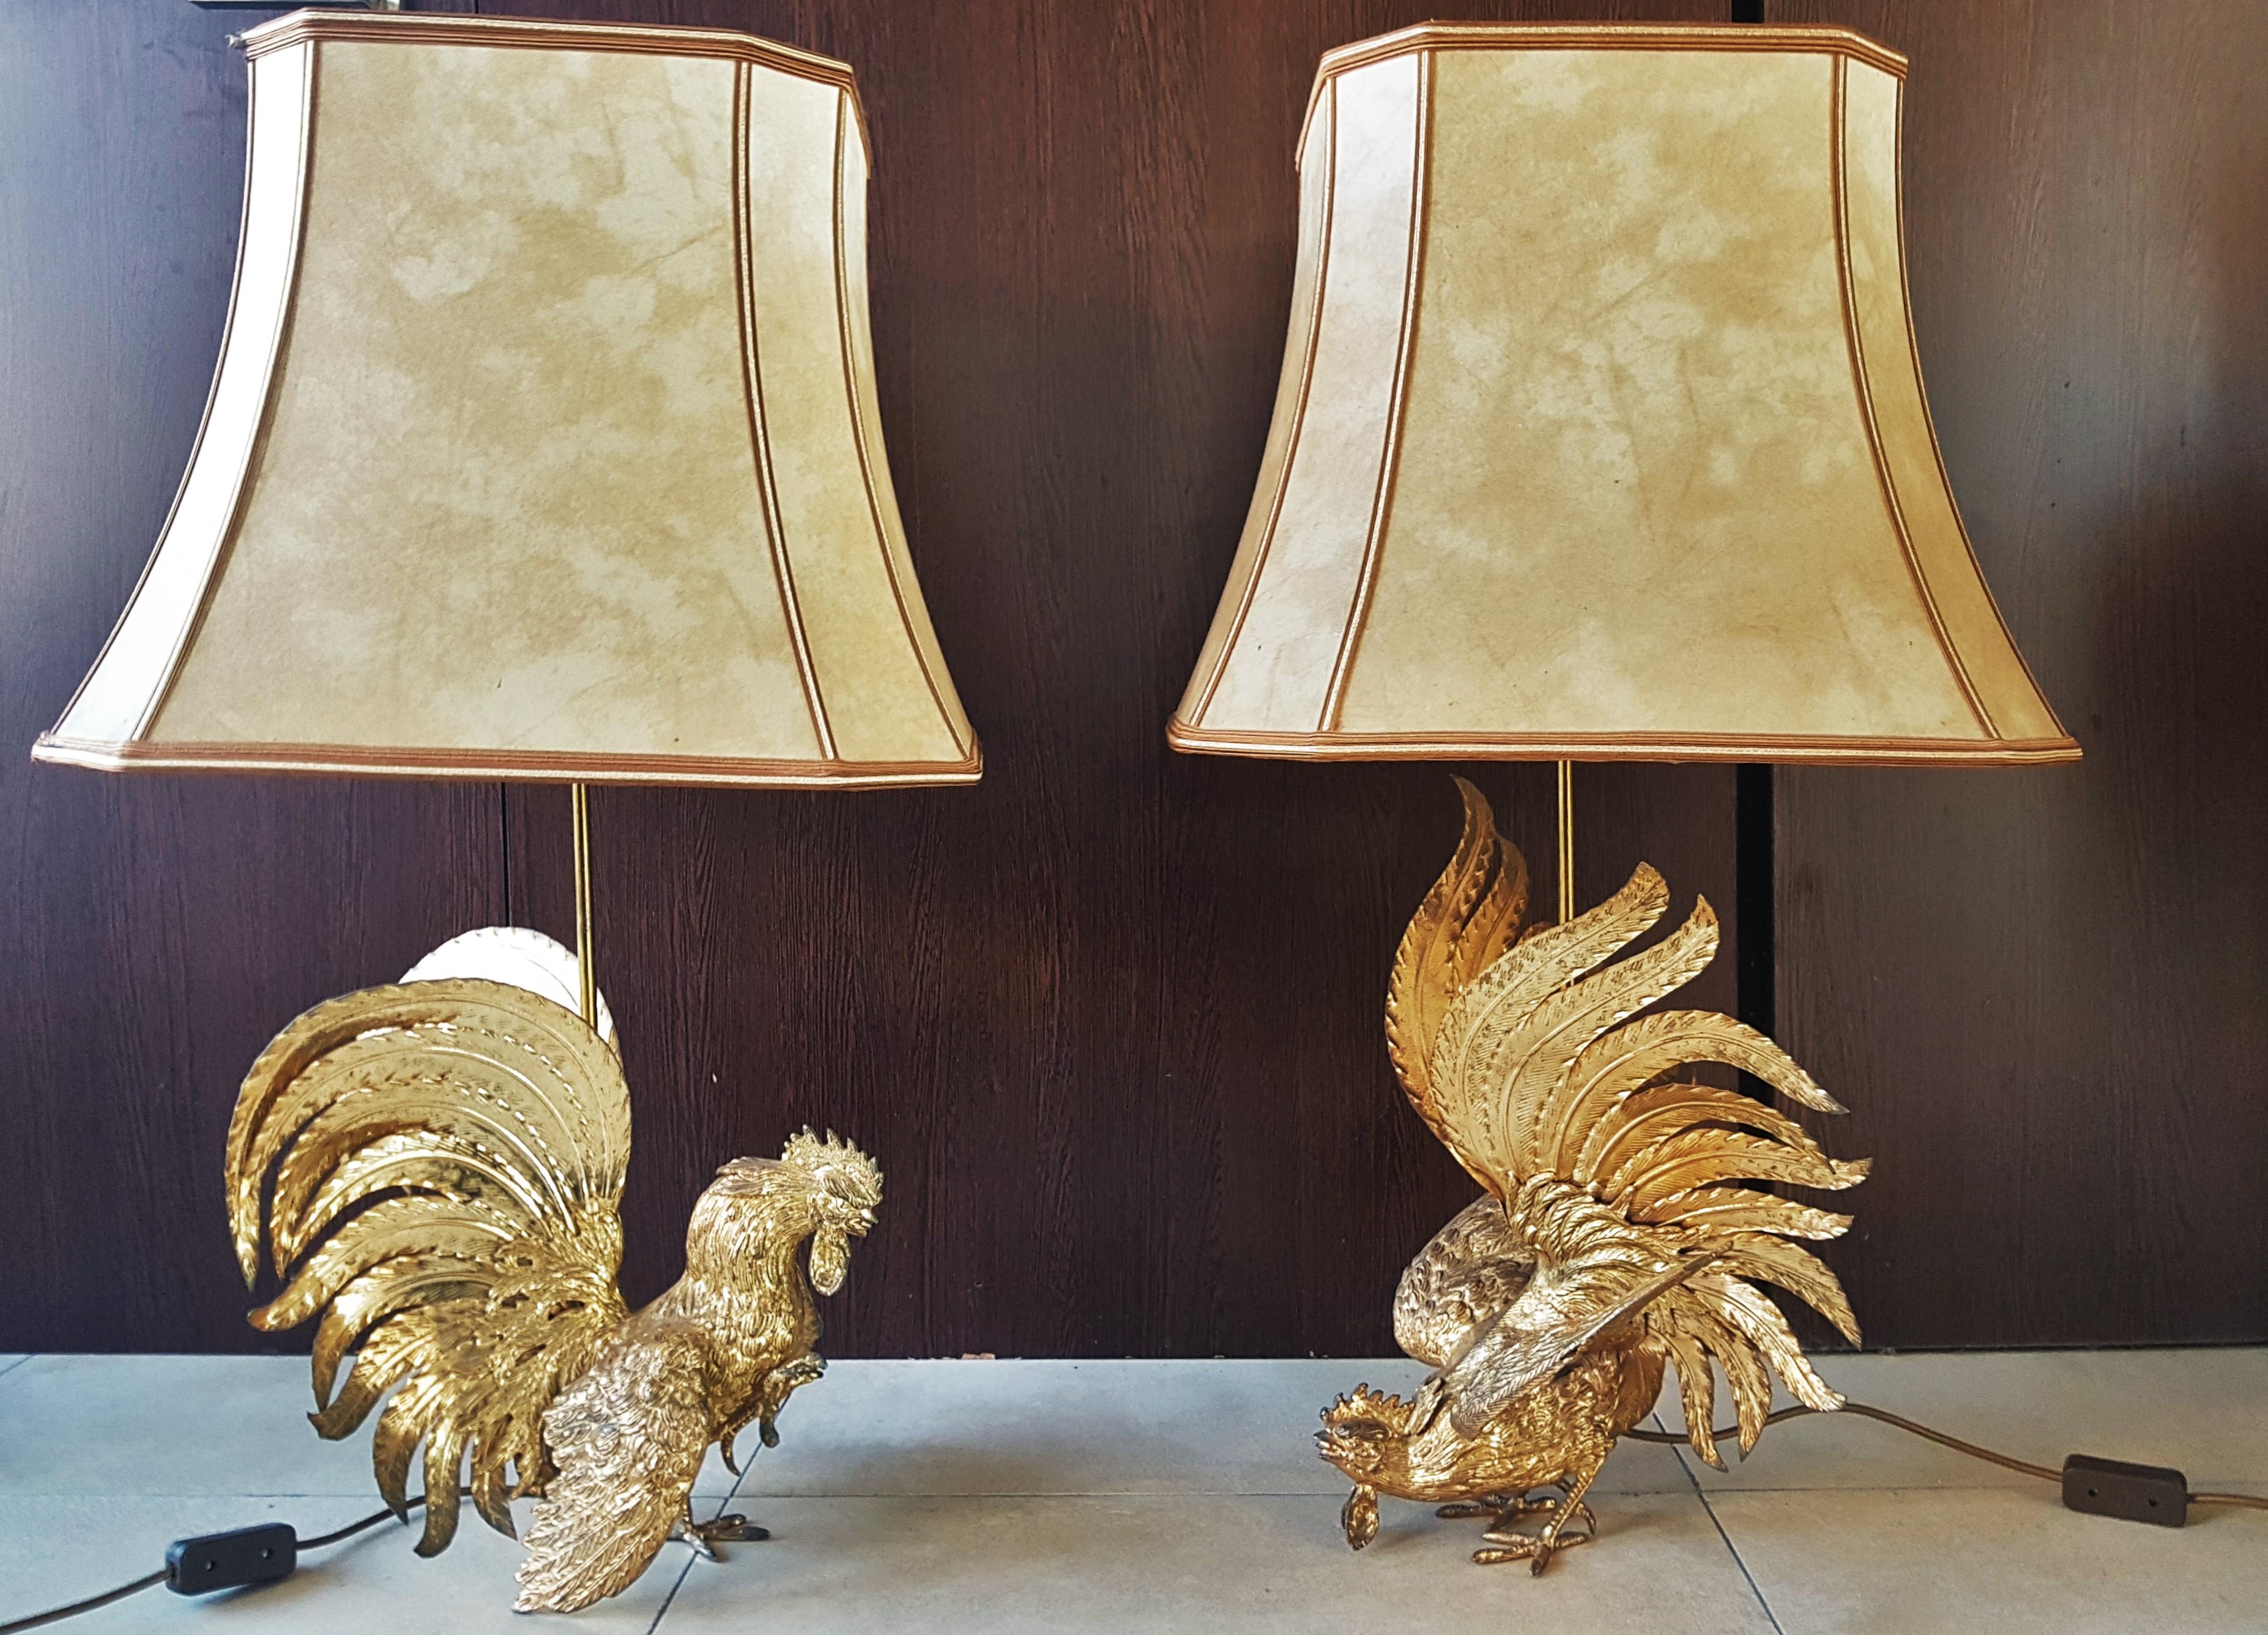 Midcentury Rooster Sculpture Brass Lamps, Italy, 1960s For Sale 9